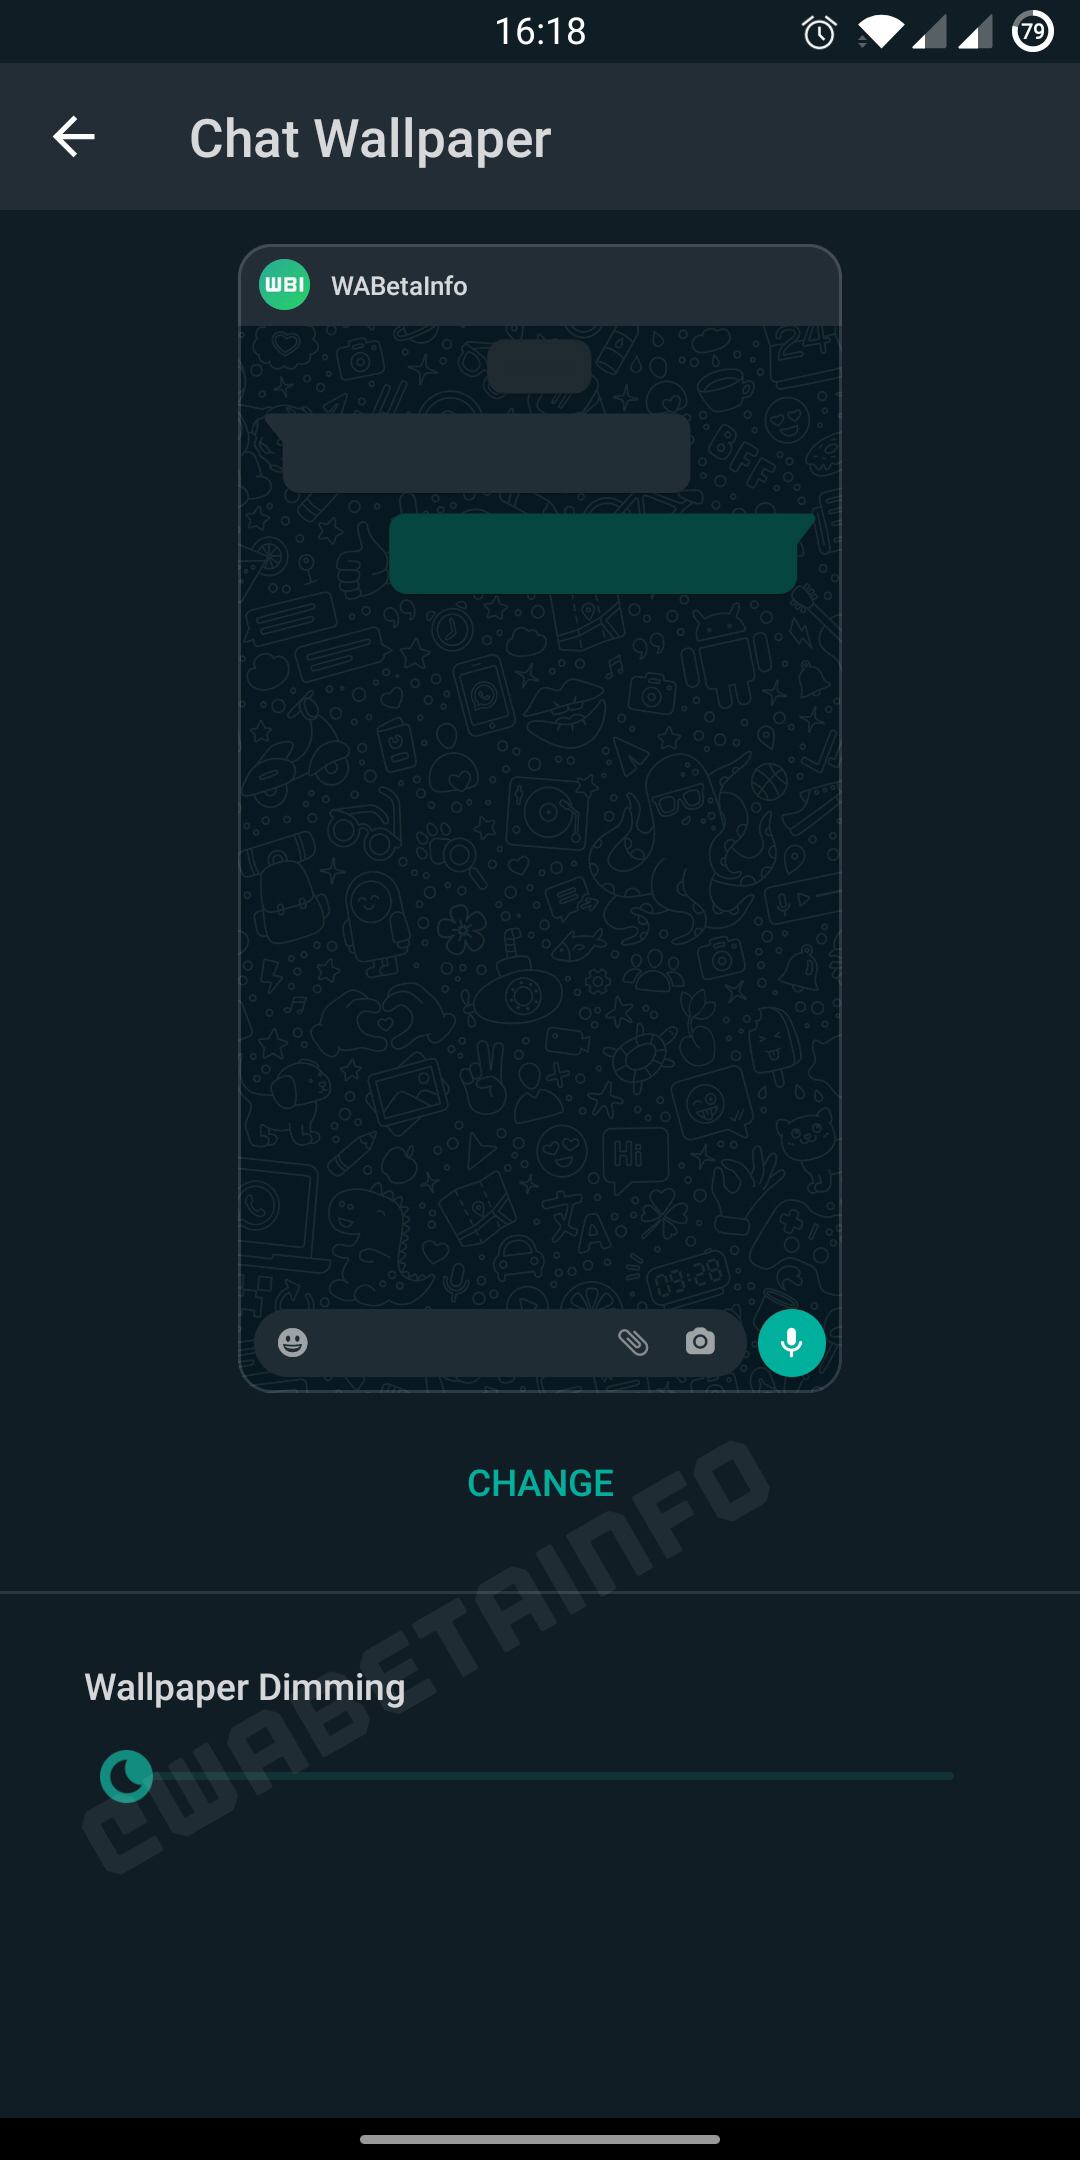 How to Set Wallpaper to WhatsApp Chat  iPhone  Android HINDI  YouTube